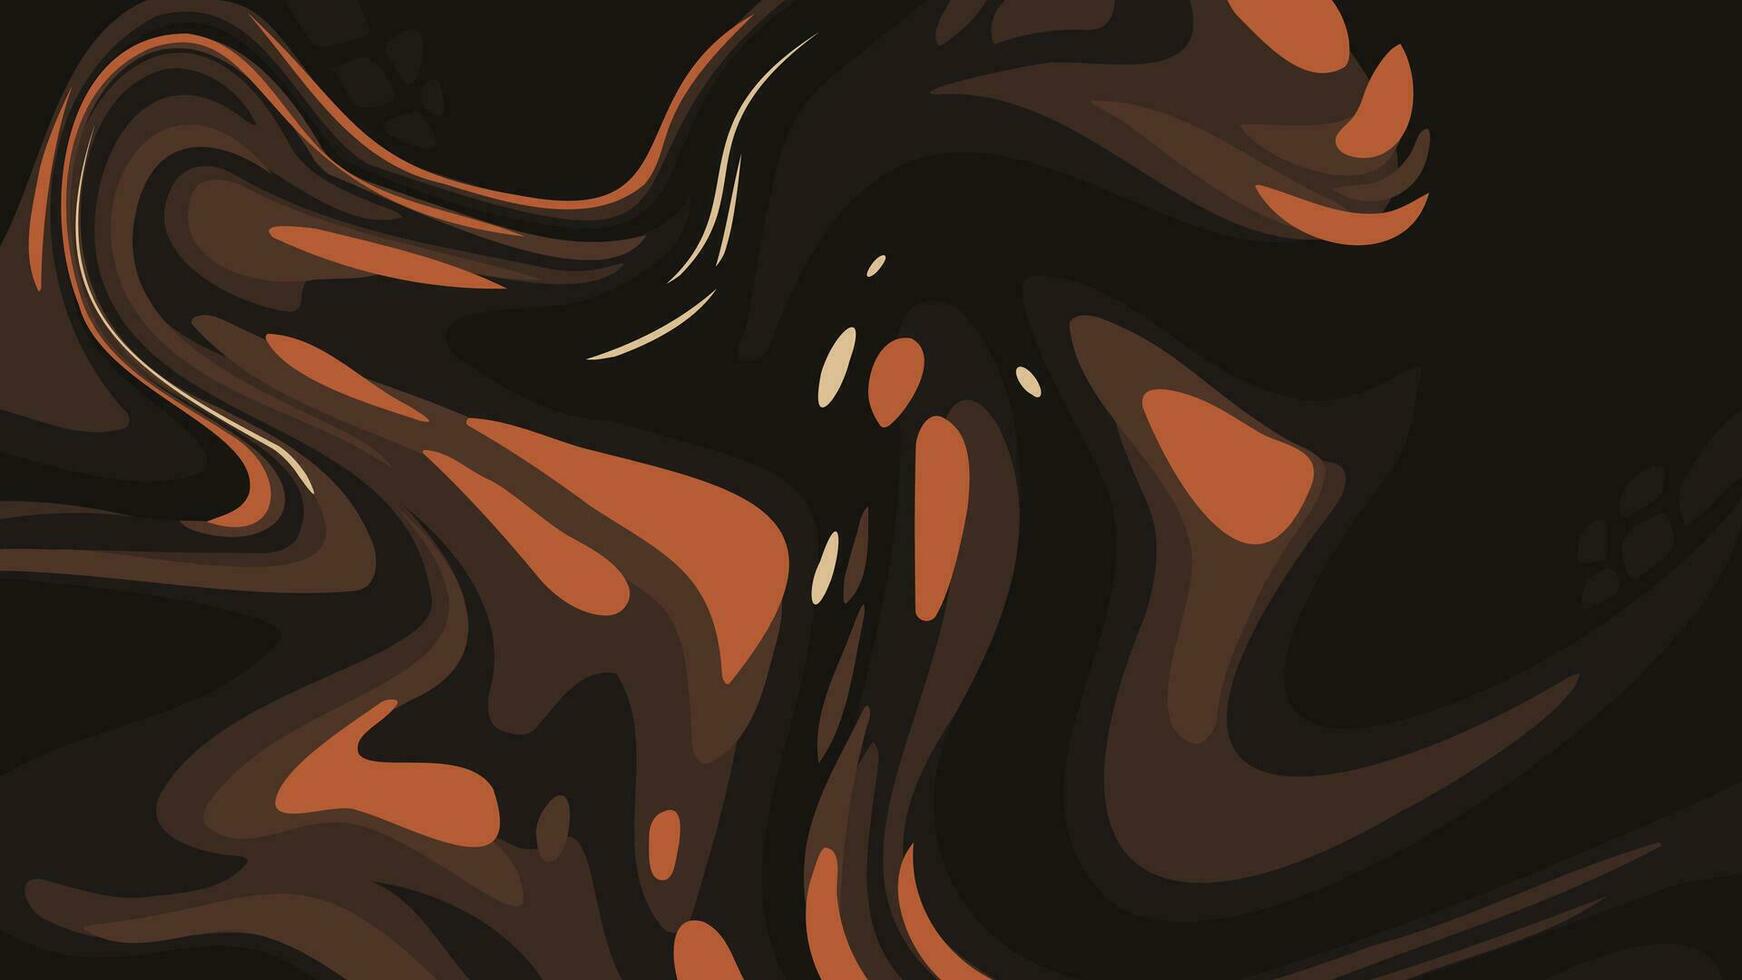 Black Brown Abstract Ink Wave Vector Wallpaper Background Image